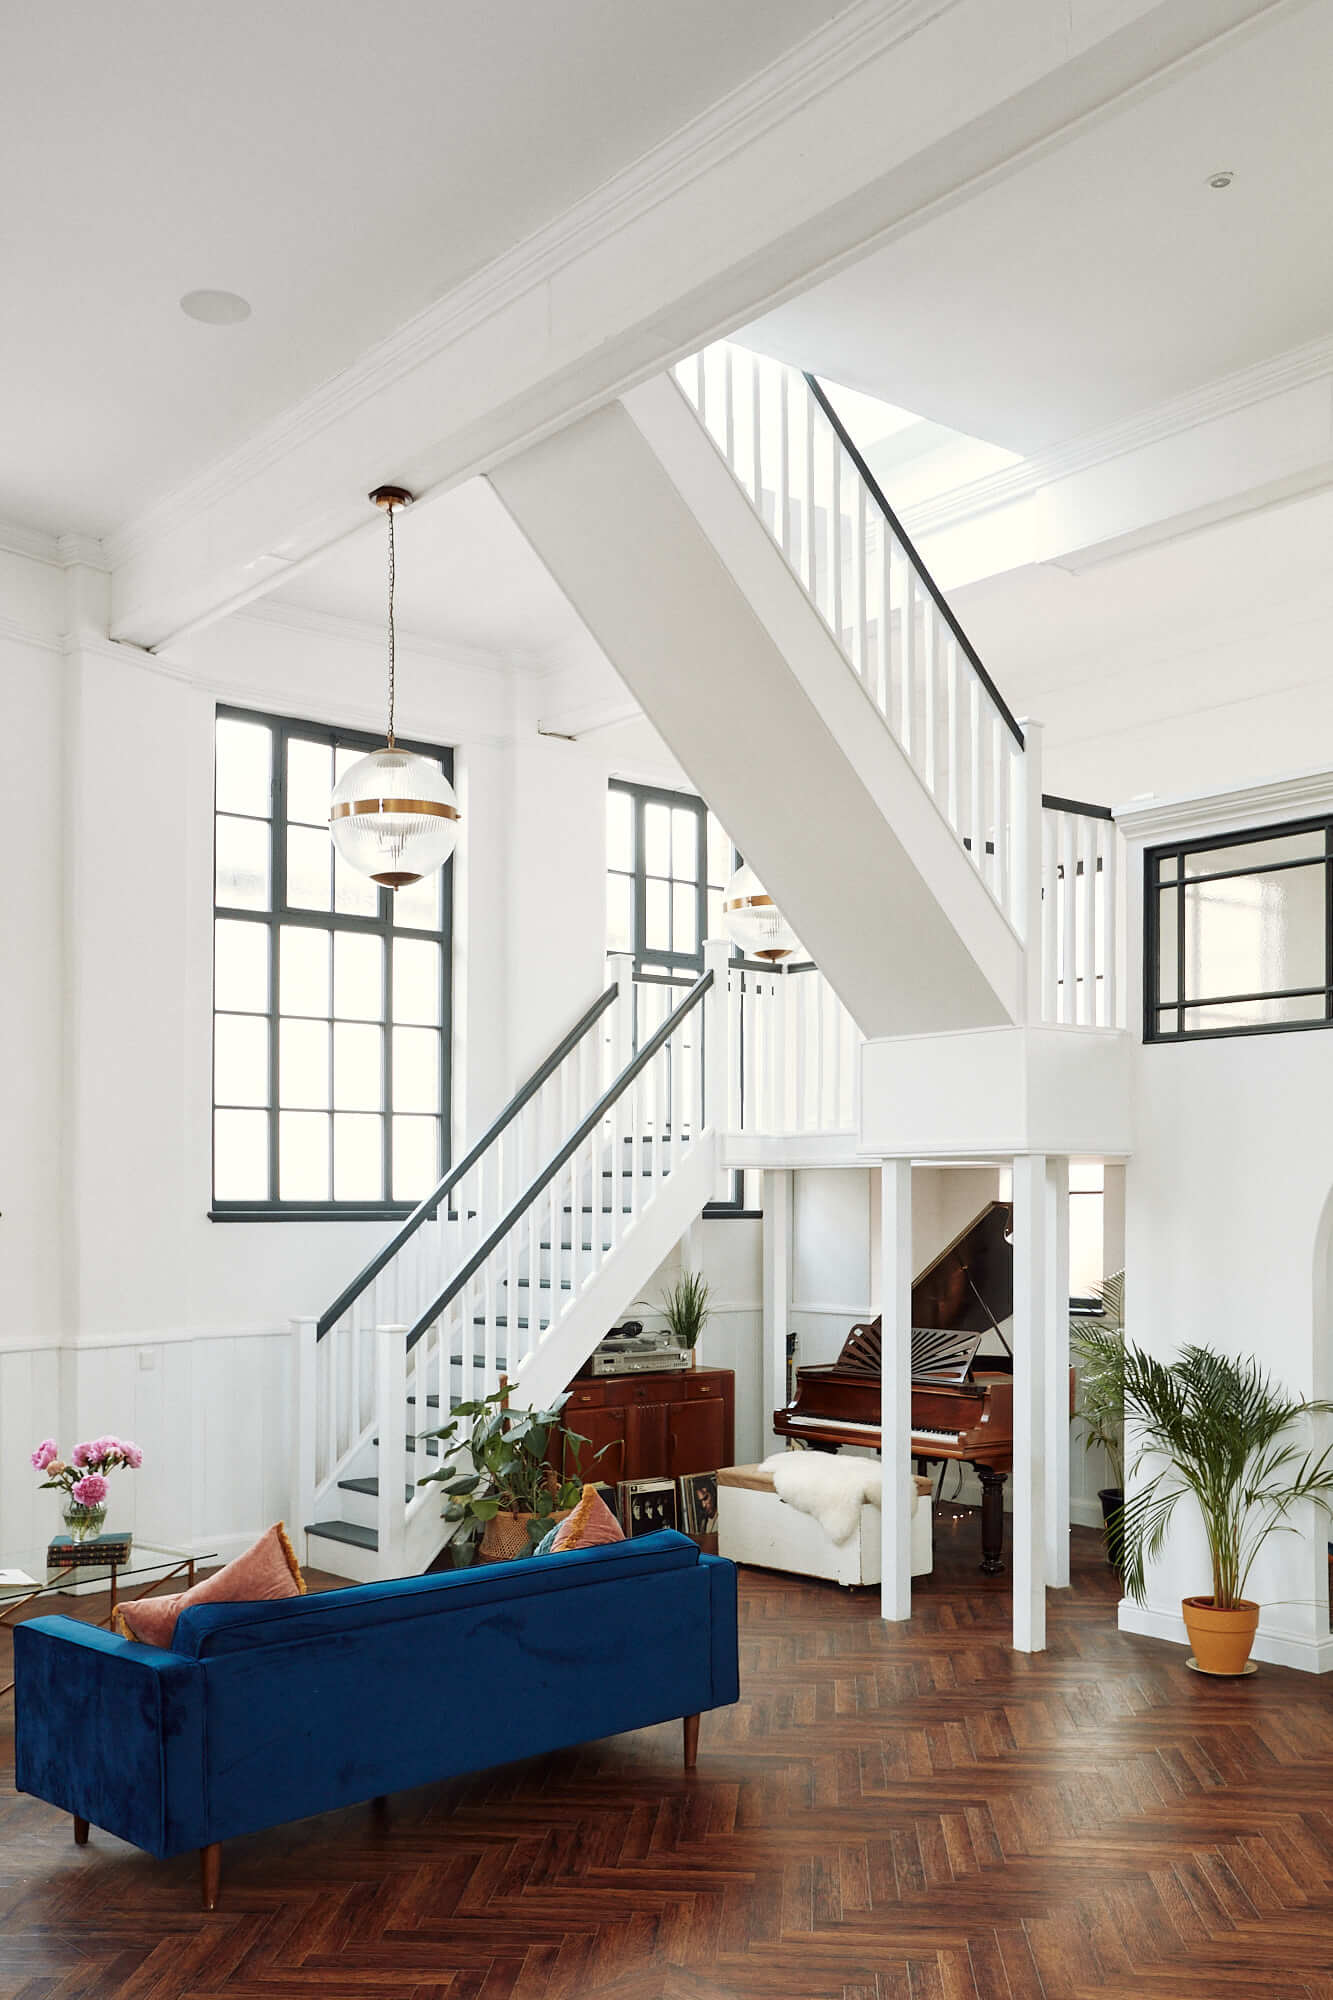 Loft Style Spaces in a Renovated Salvation Army Hall